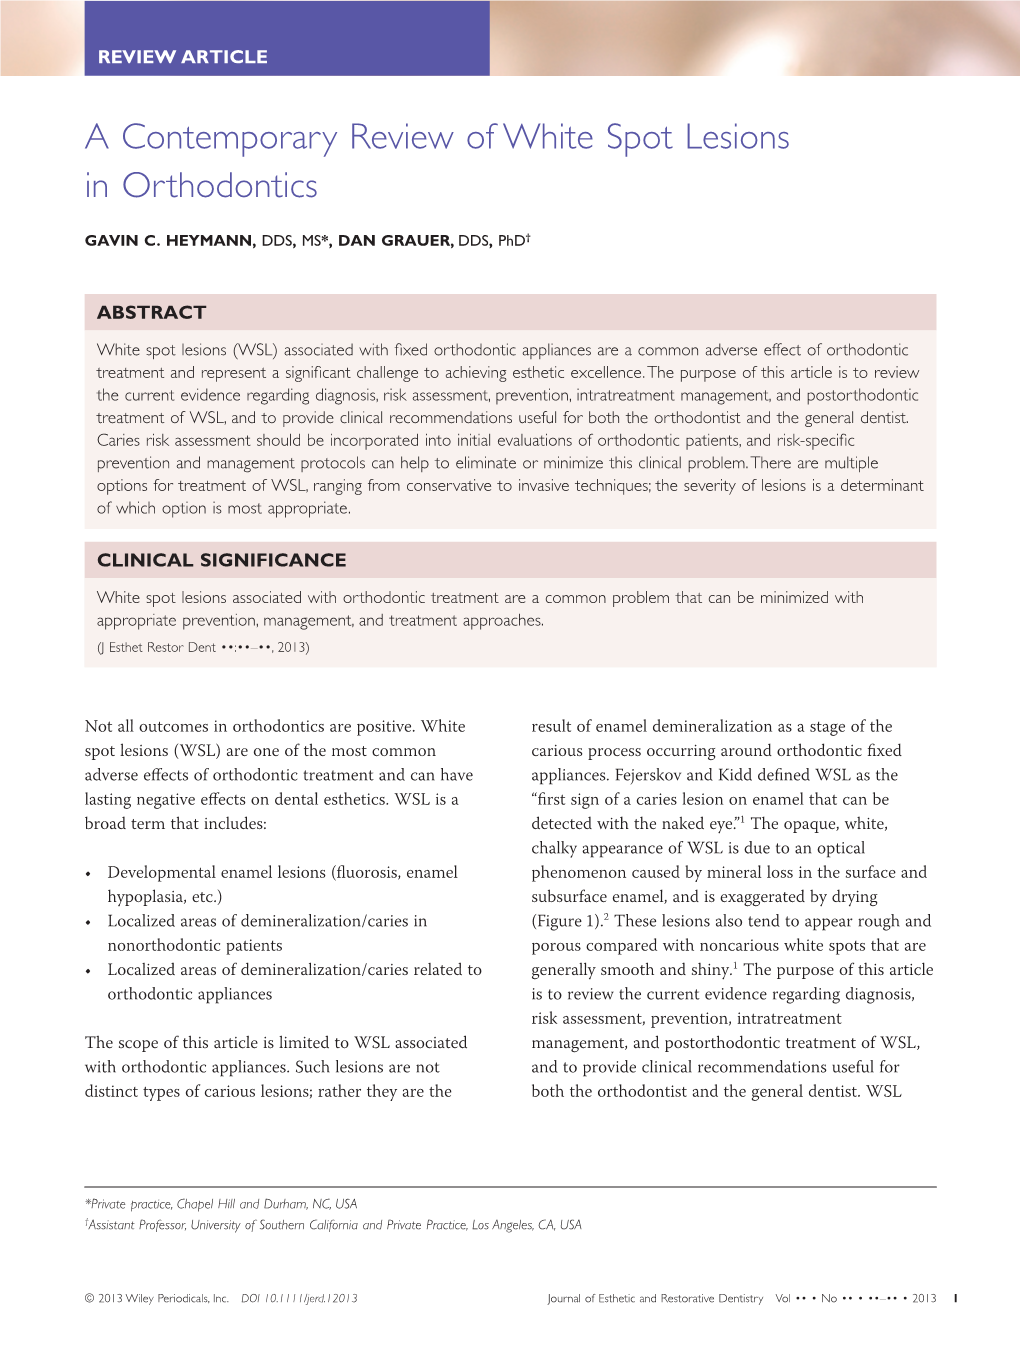 A Contemporary Review of White Spot Lesions in Orthodontics